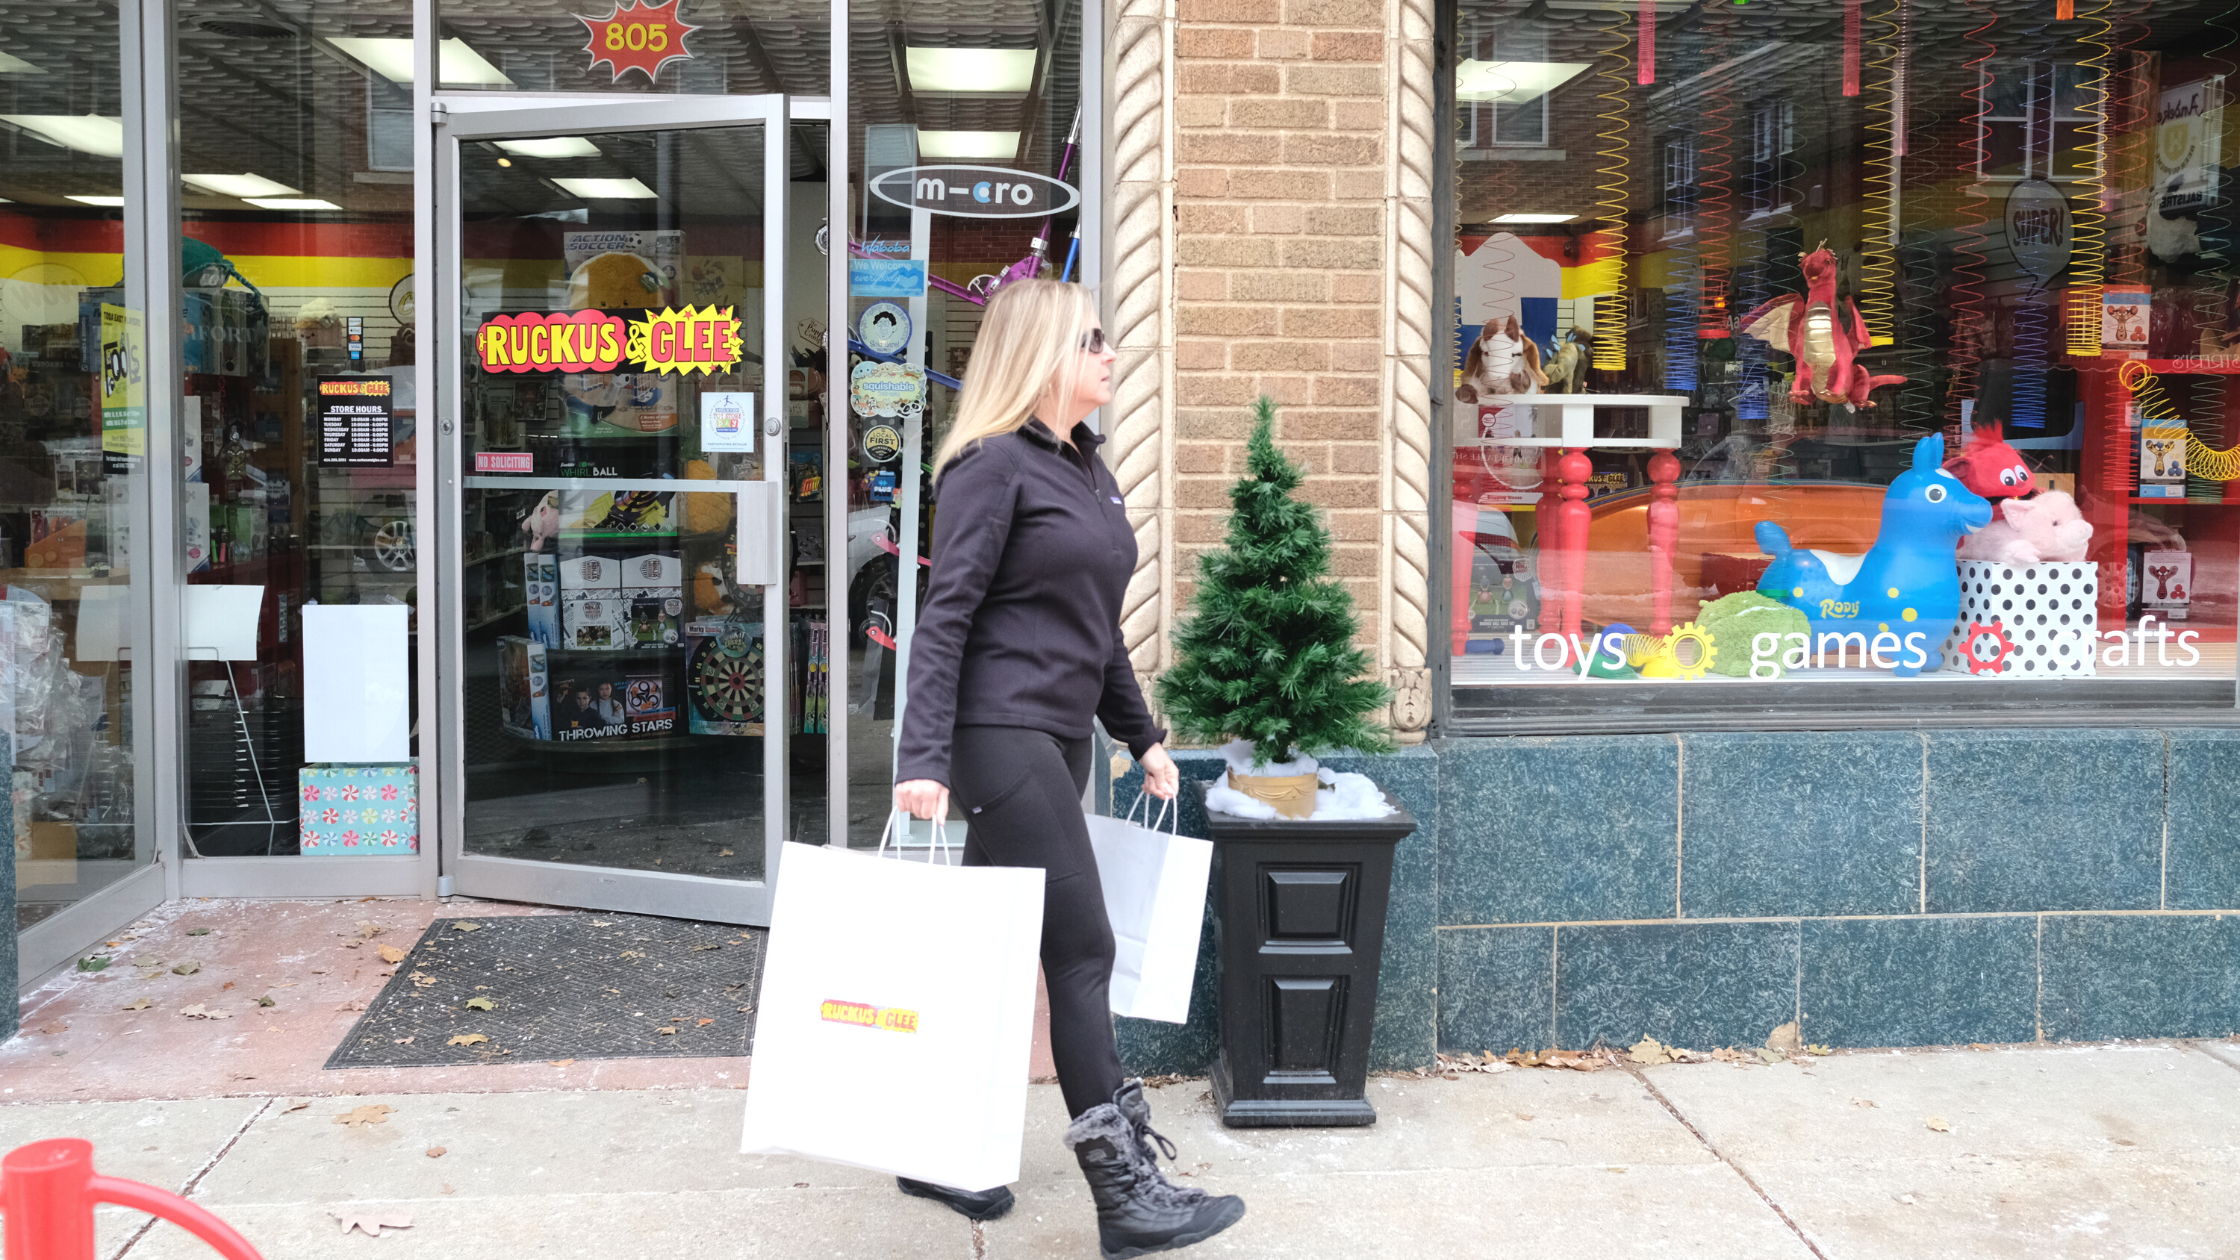 Woman walking out of Ruckus & Glee holding shopping bags in Wauwatosa, WI